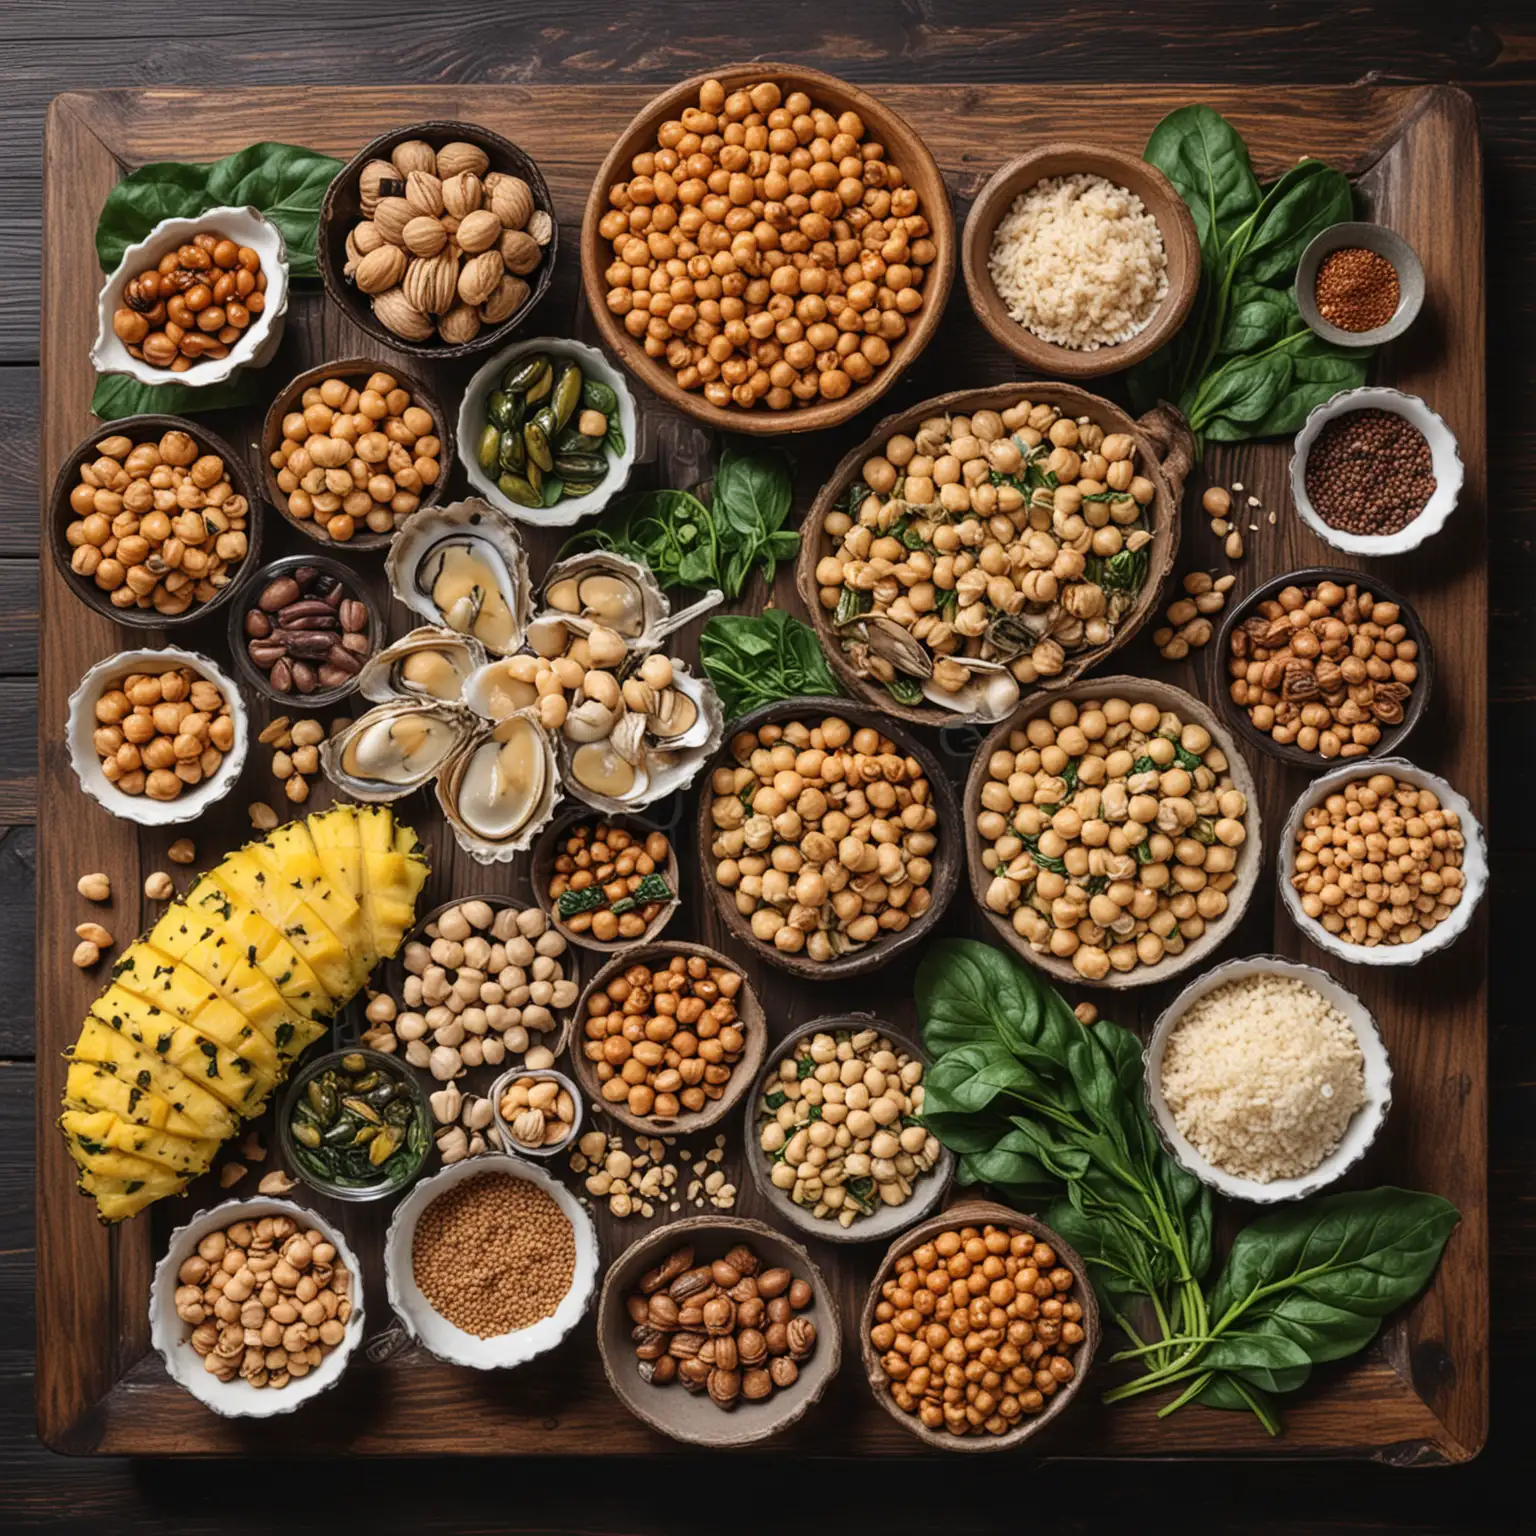 appetizing, attractive arrangement of foods on dark wooden table. foods to include: Whole grains, pineapple, hazelnuts, clams, oysters, mussels, soybeans and other legumes (such as chickpeas), rice, leafy vegetables (such as spinach), cup of coffee, cup of black tea